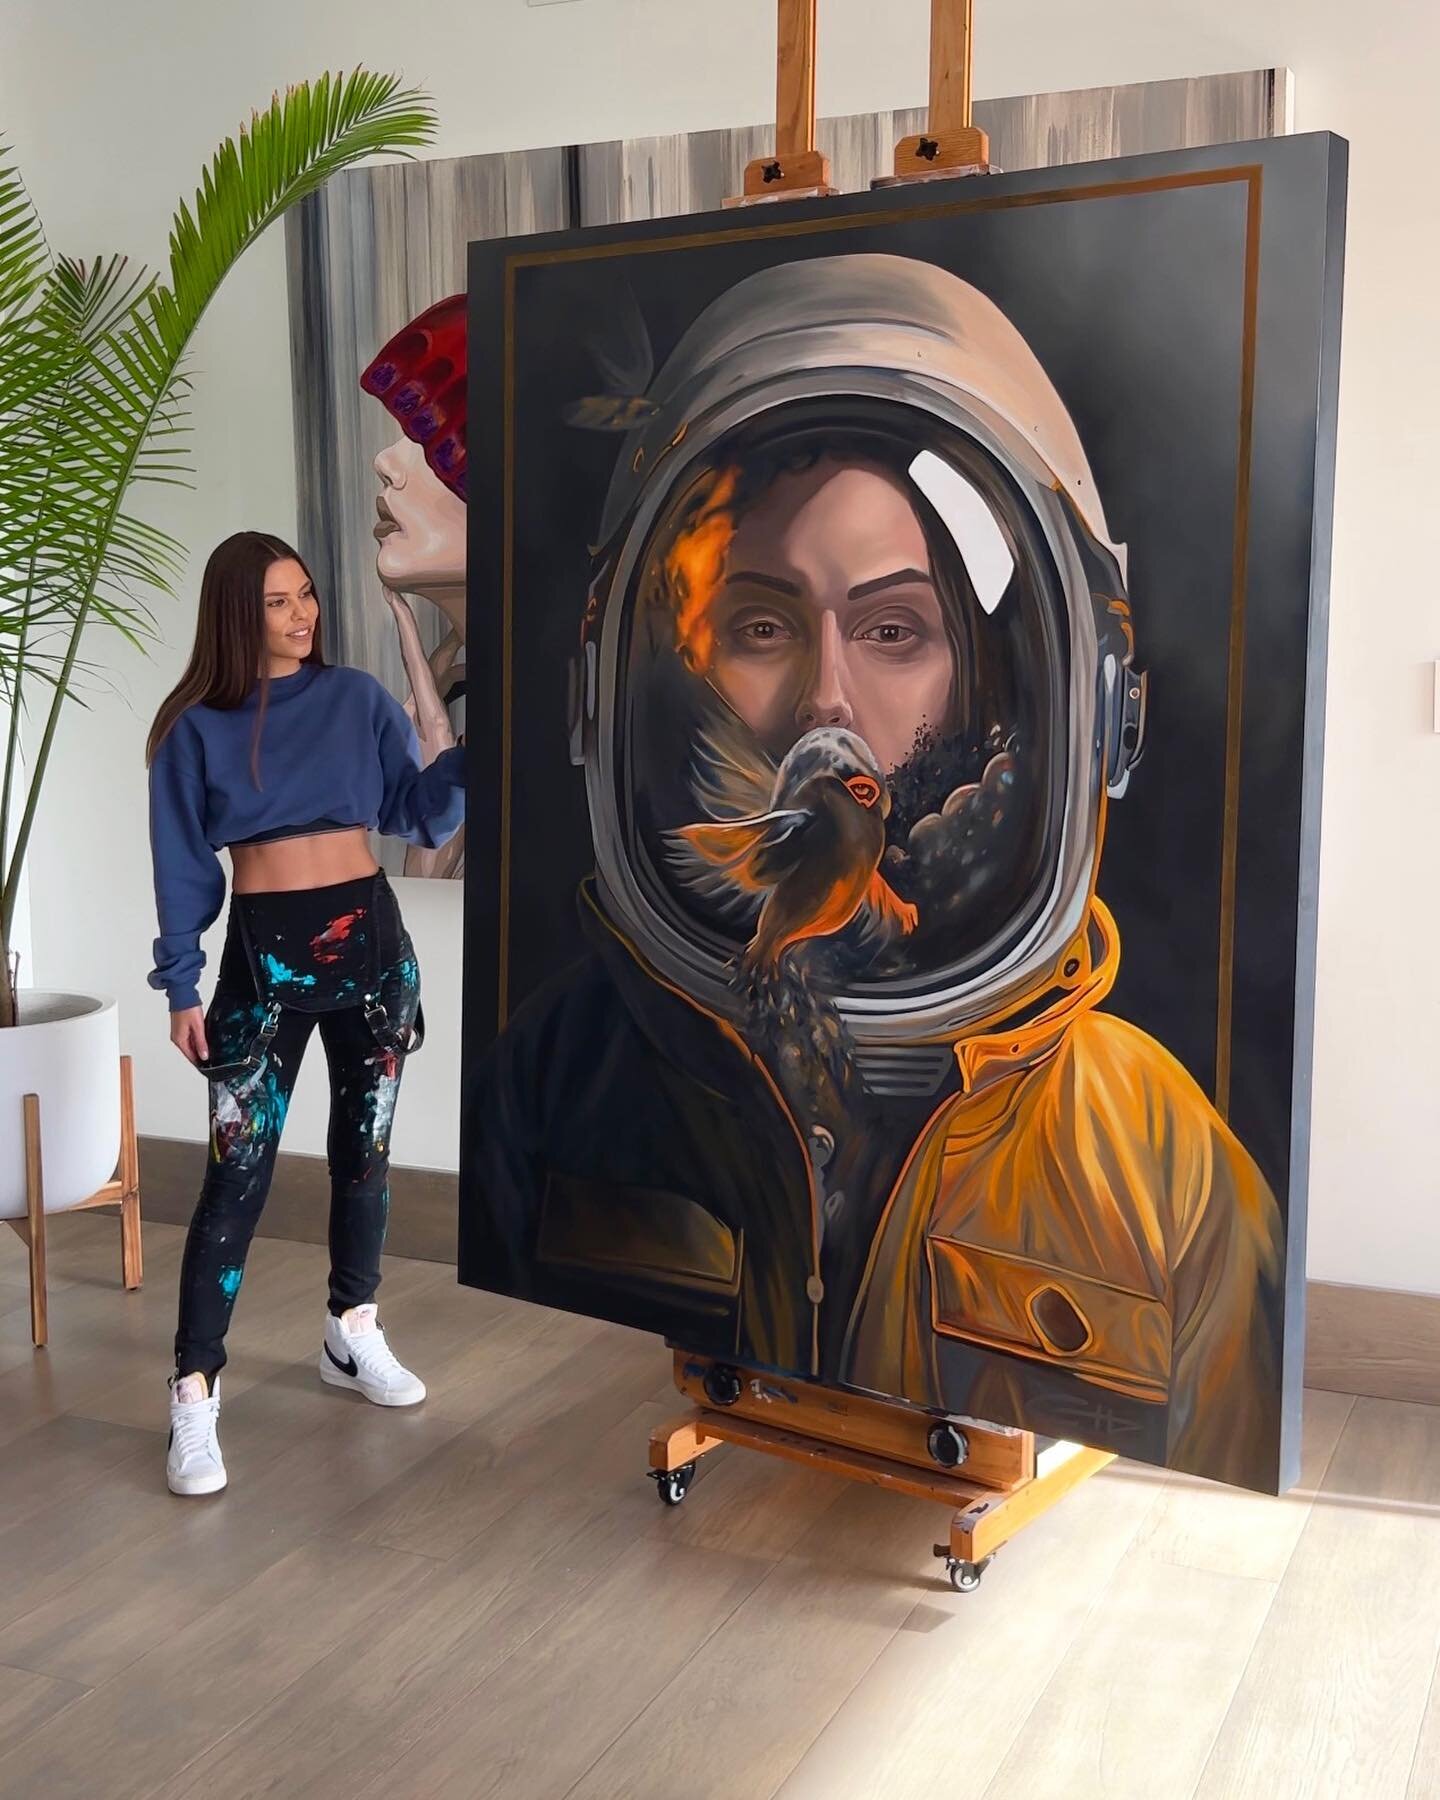 Huge oil painting of an astronaut! I forgot to post the final reveal! This original painting uses variations of orange and paynes grey oil paint. There is NO BLACK paint in this painting. 

Casey

#oilpainting #art #artist #painter #paintingoftheday 